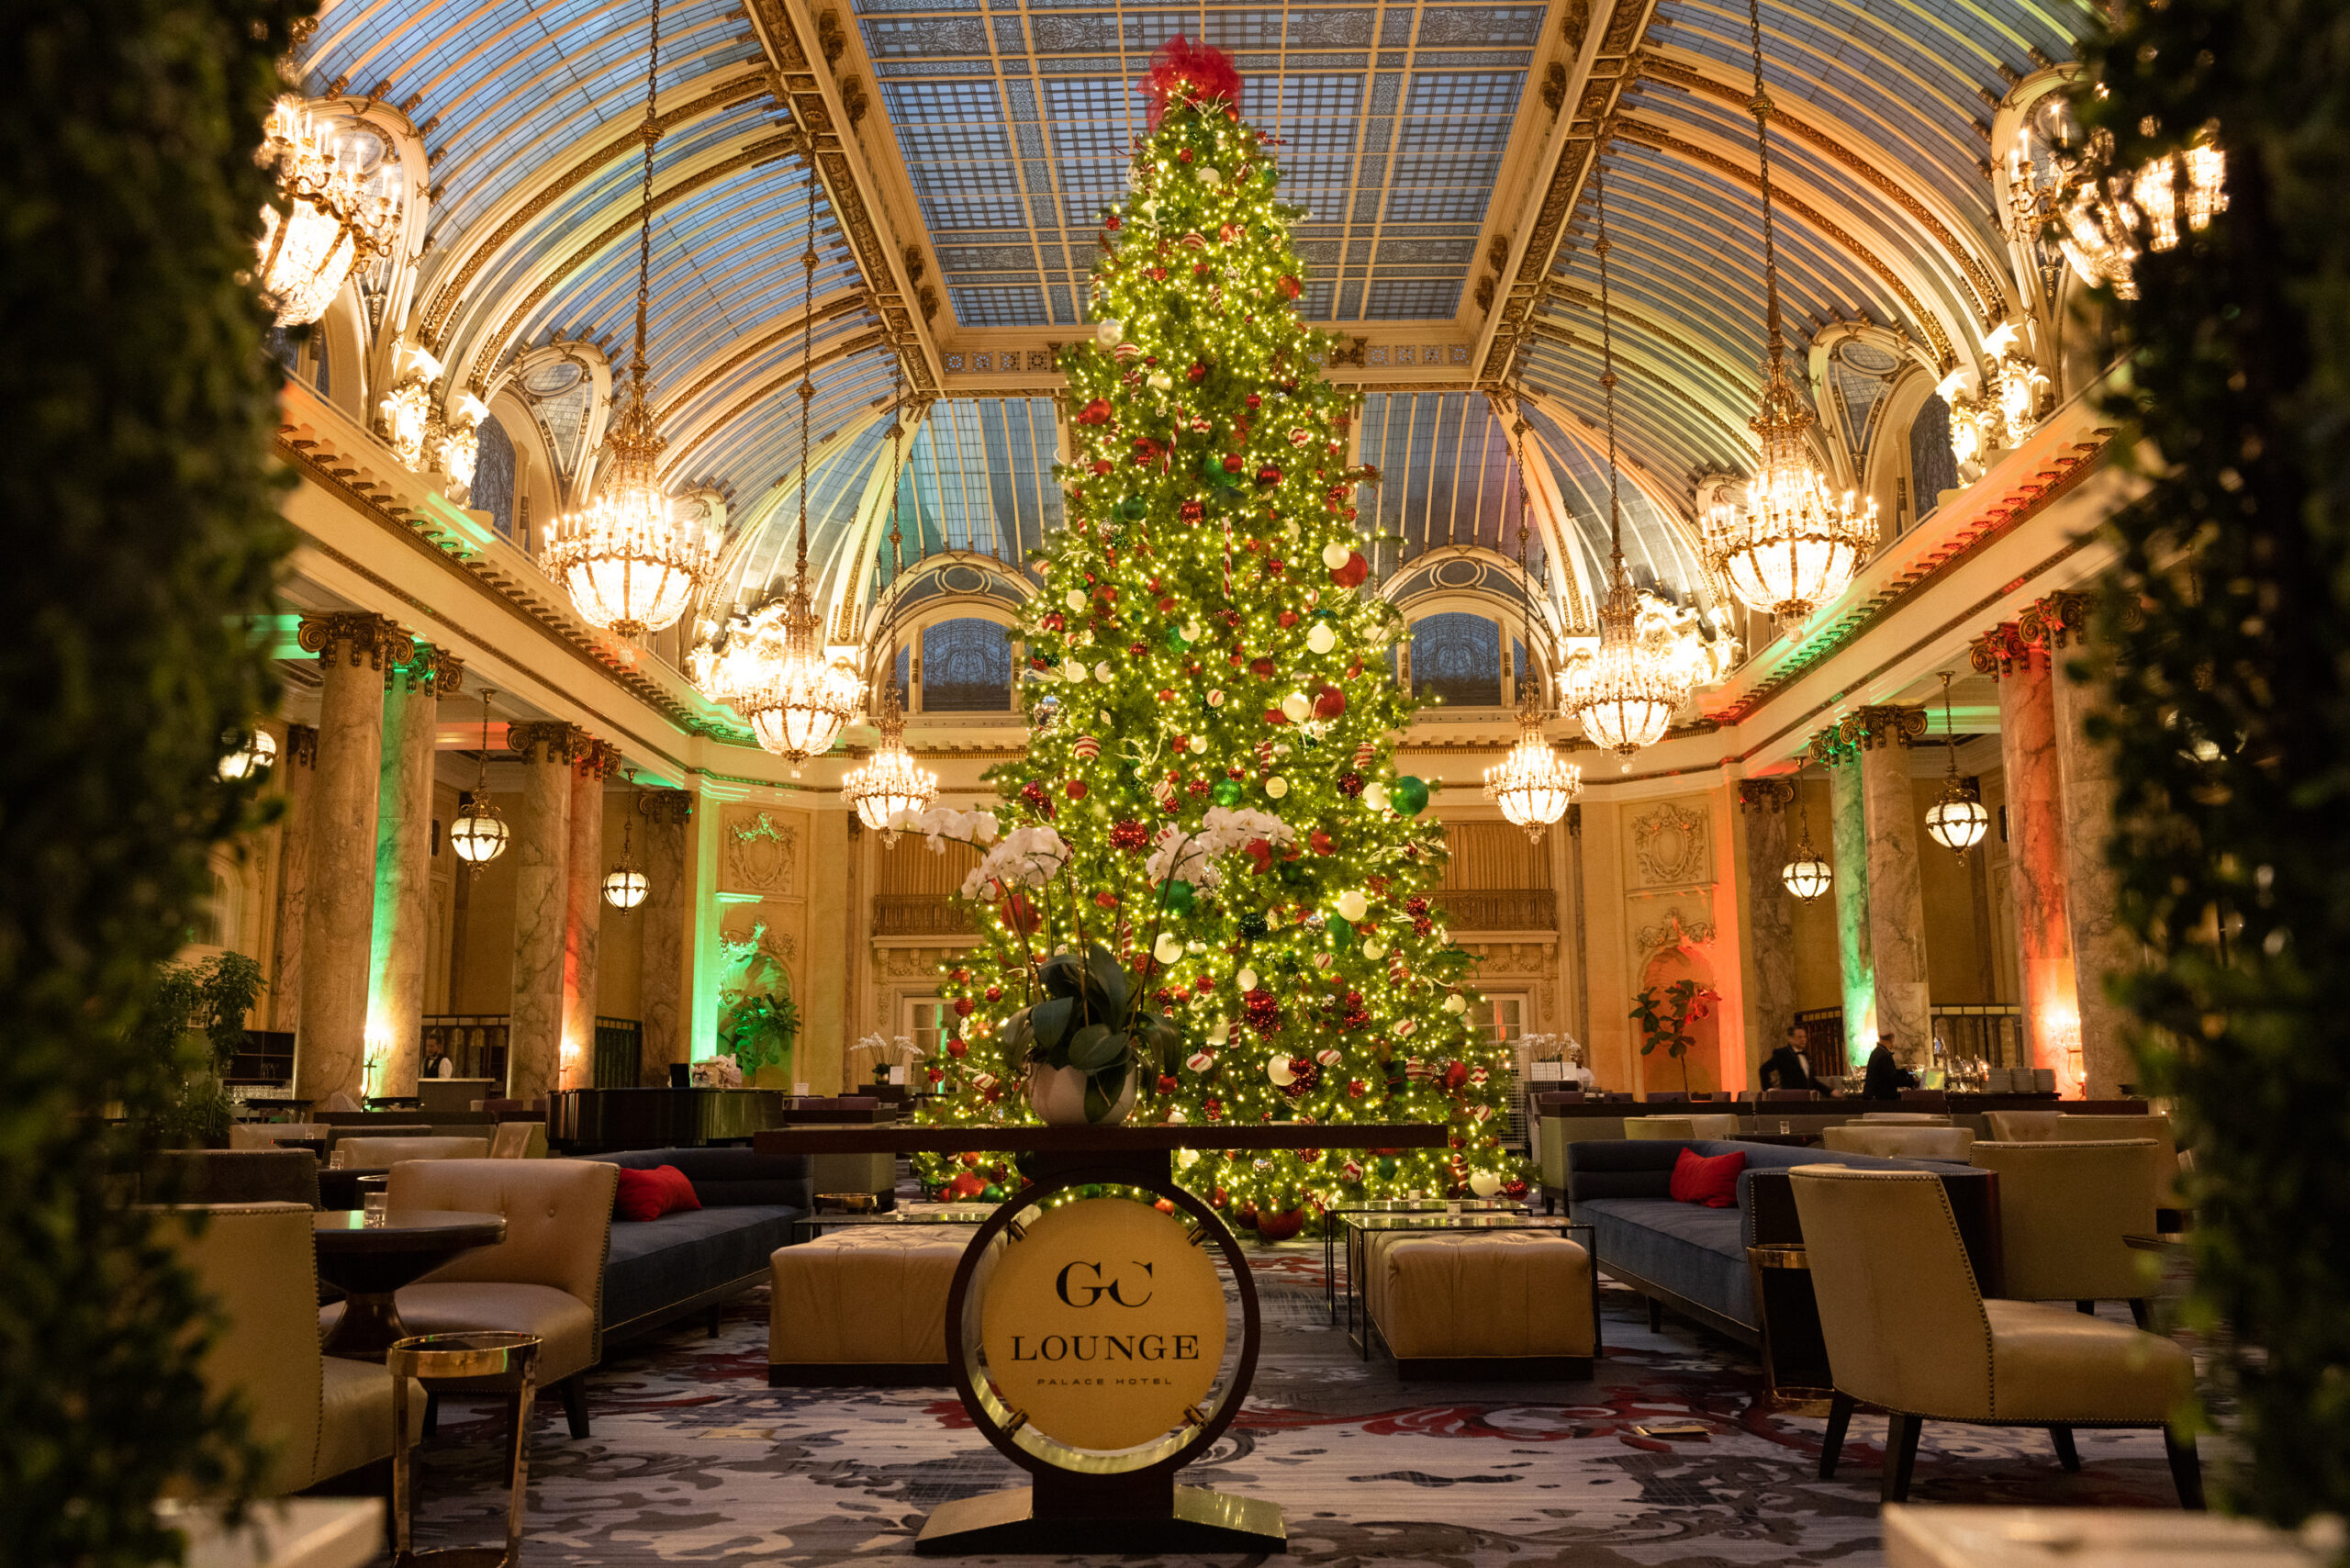 A 40-foot-tall Christmas tree stands in the glass-ceilinged Garden Court of the regal Palace Hotel in San Francisco, California.